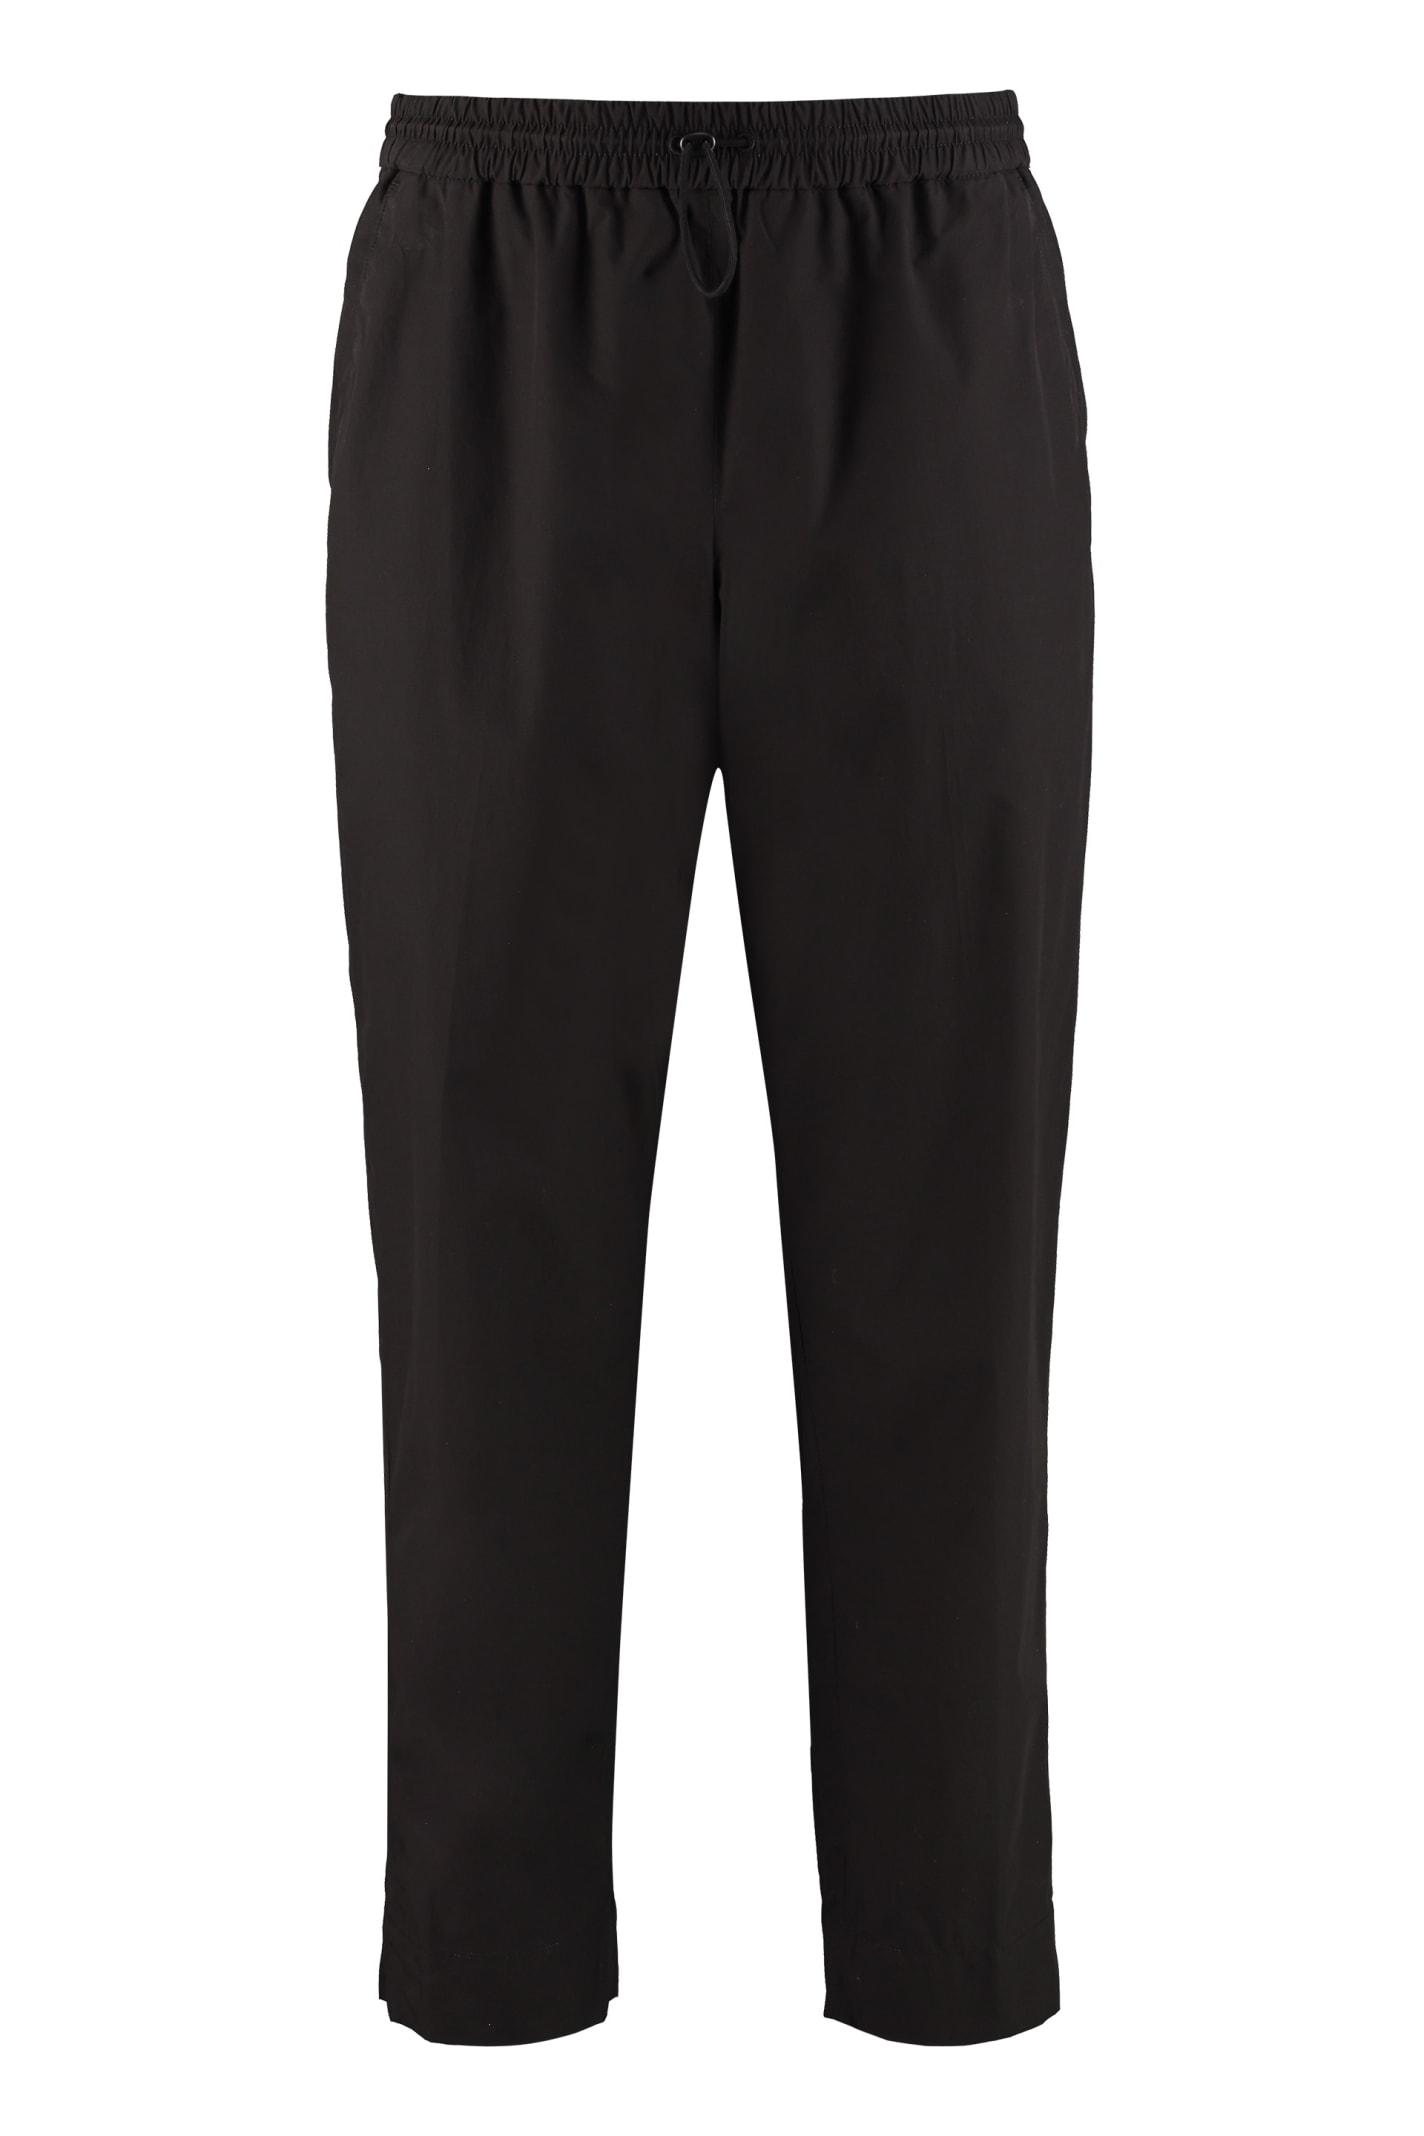 Kenzo Cotton Track-pants In Black